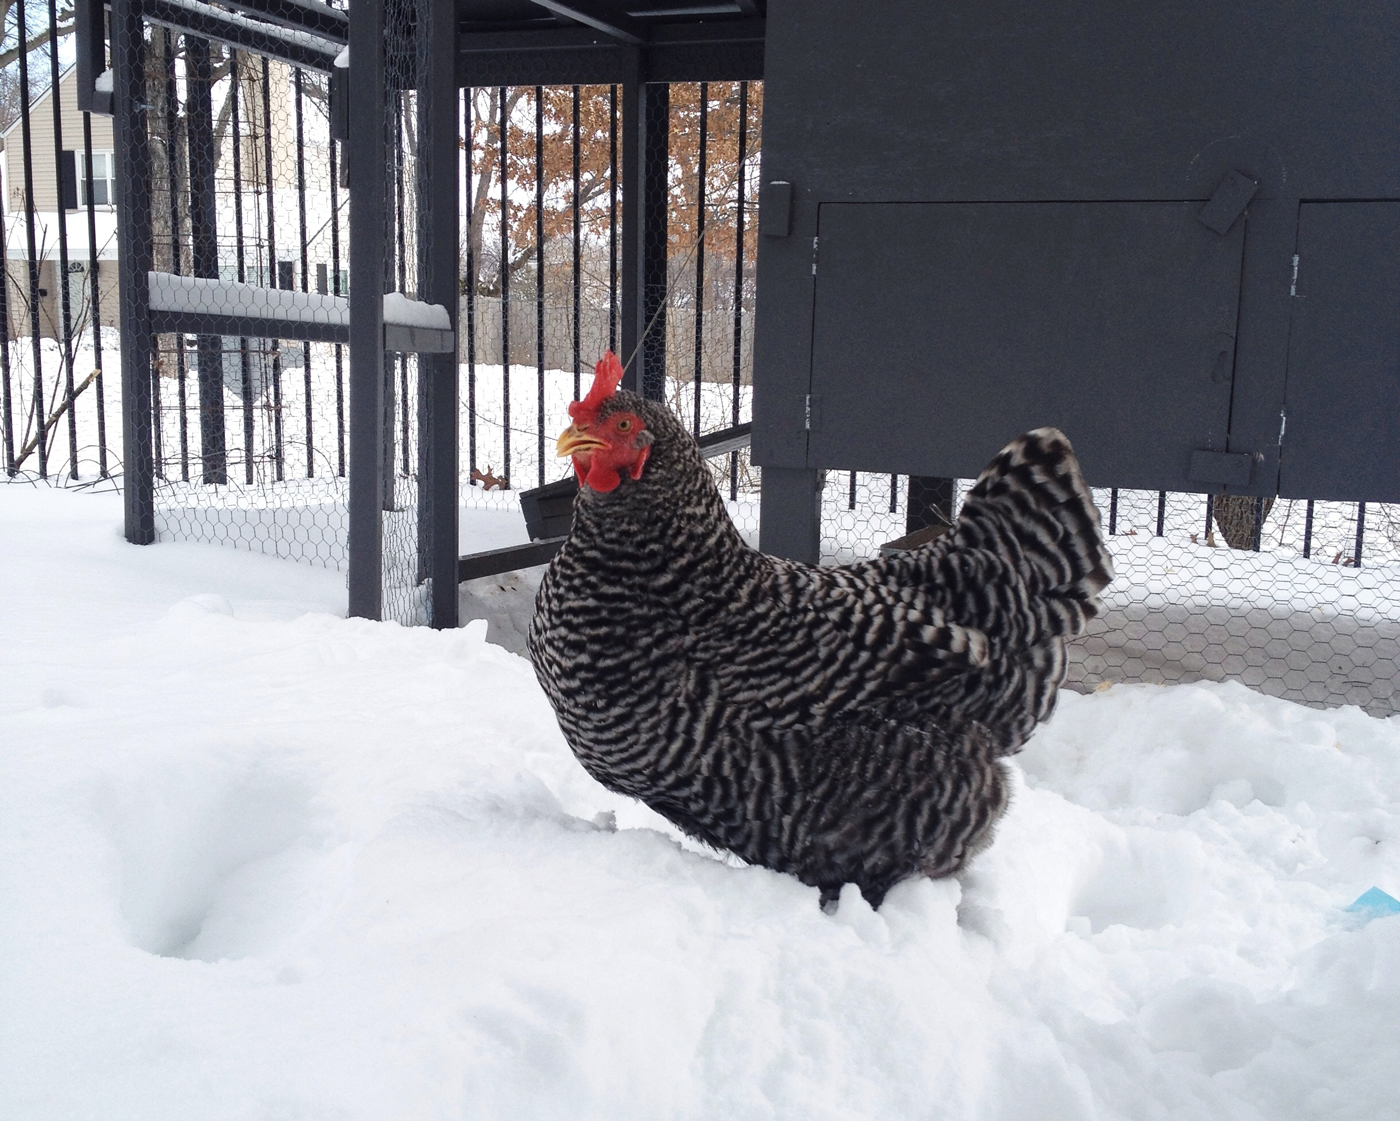 Our Barred Plymouth Rock, tromping through the snow after in 2013.